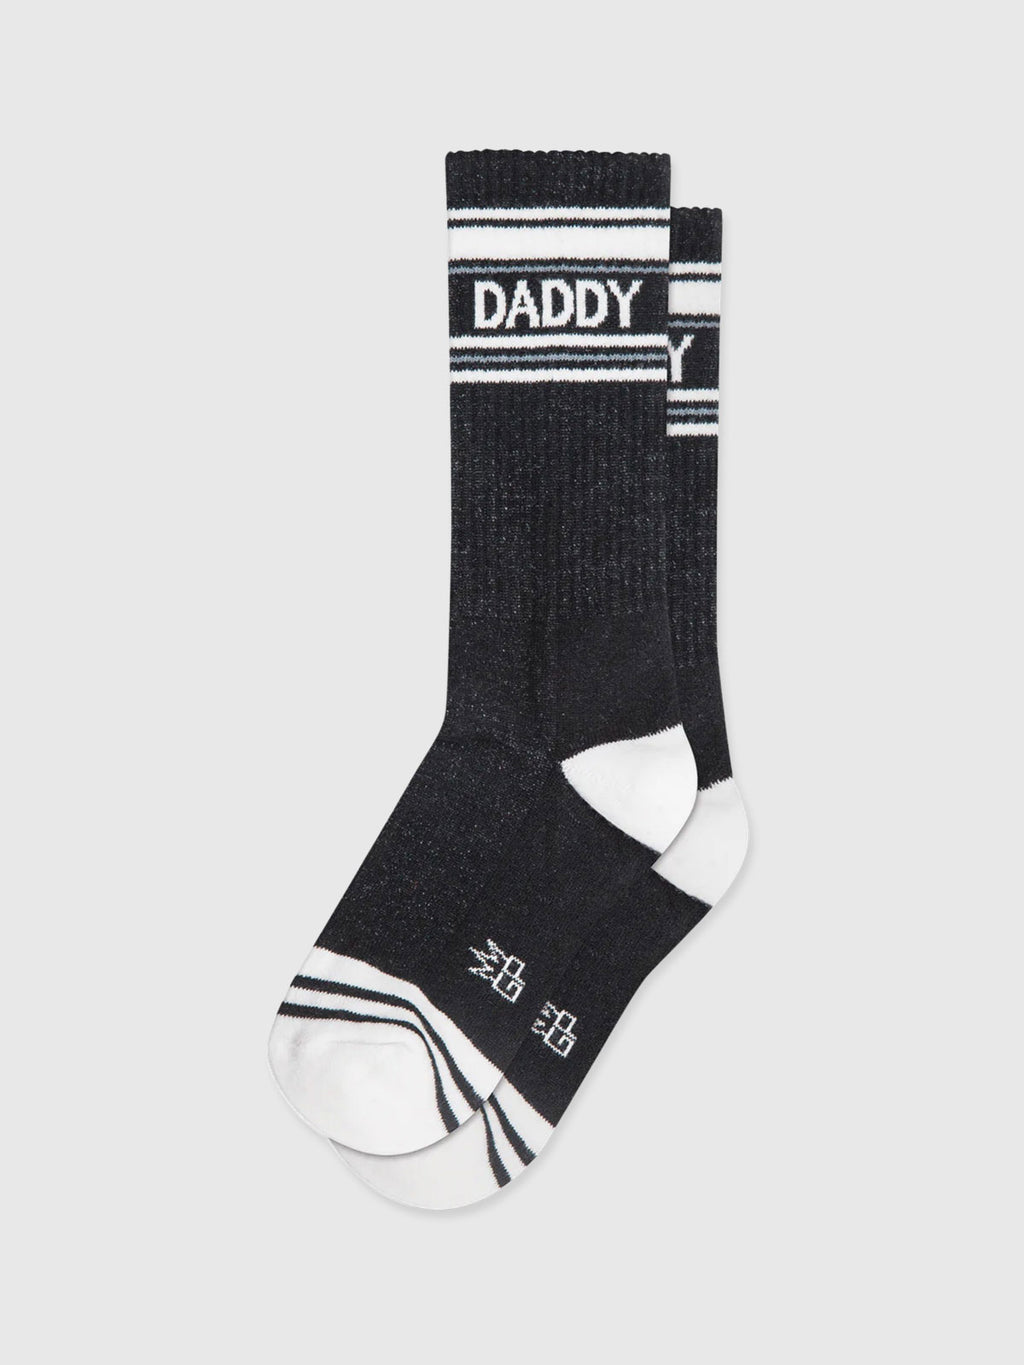 Gumball Poodle - Daddy Socks